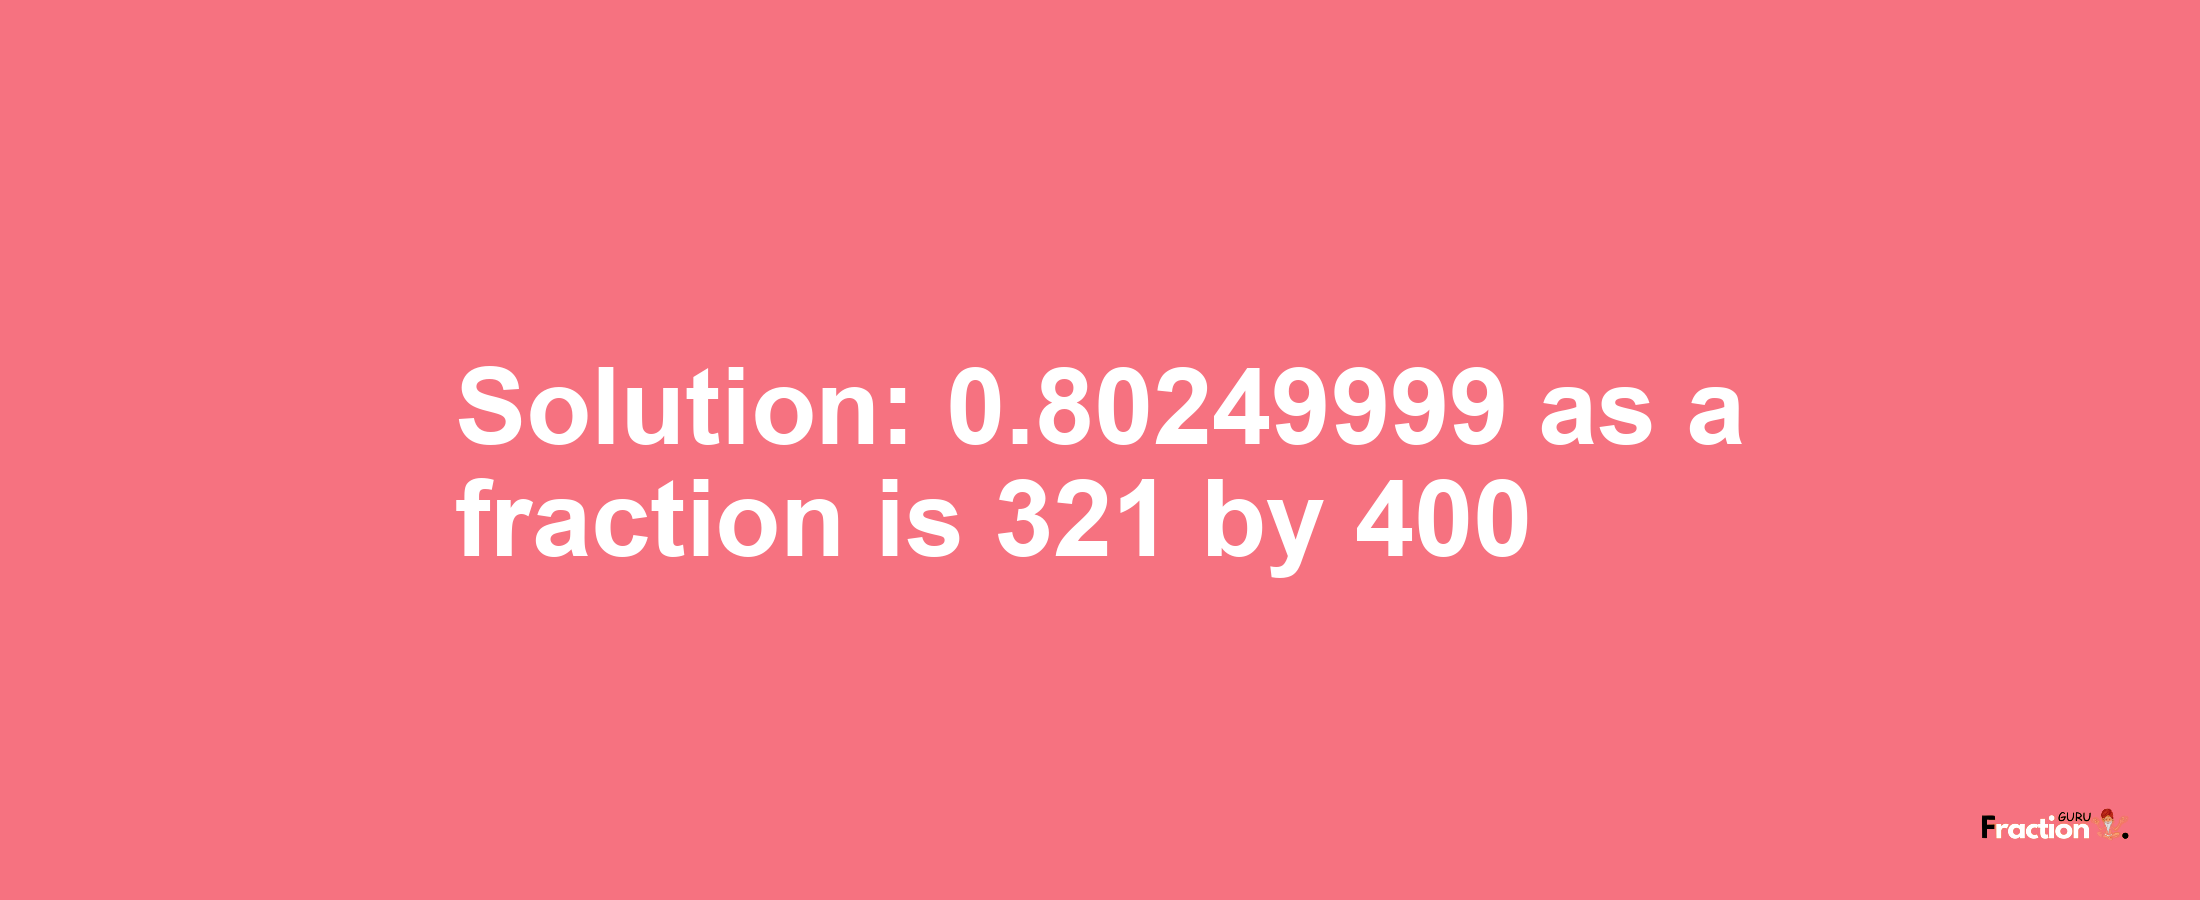 Solution:0.80249999 as a fraction is 321/400